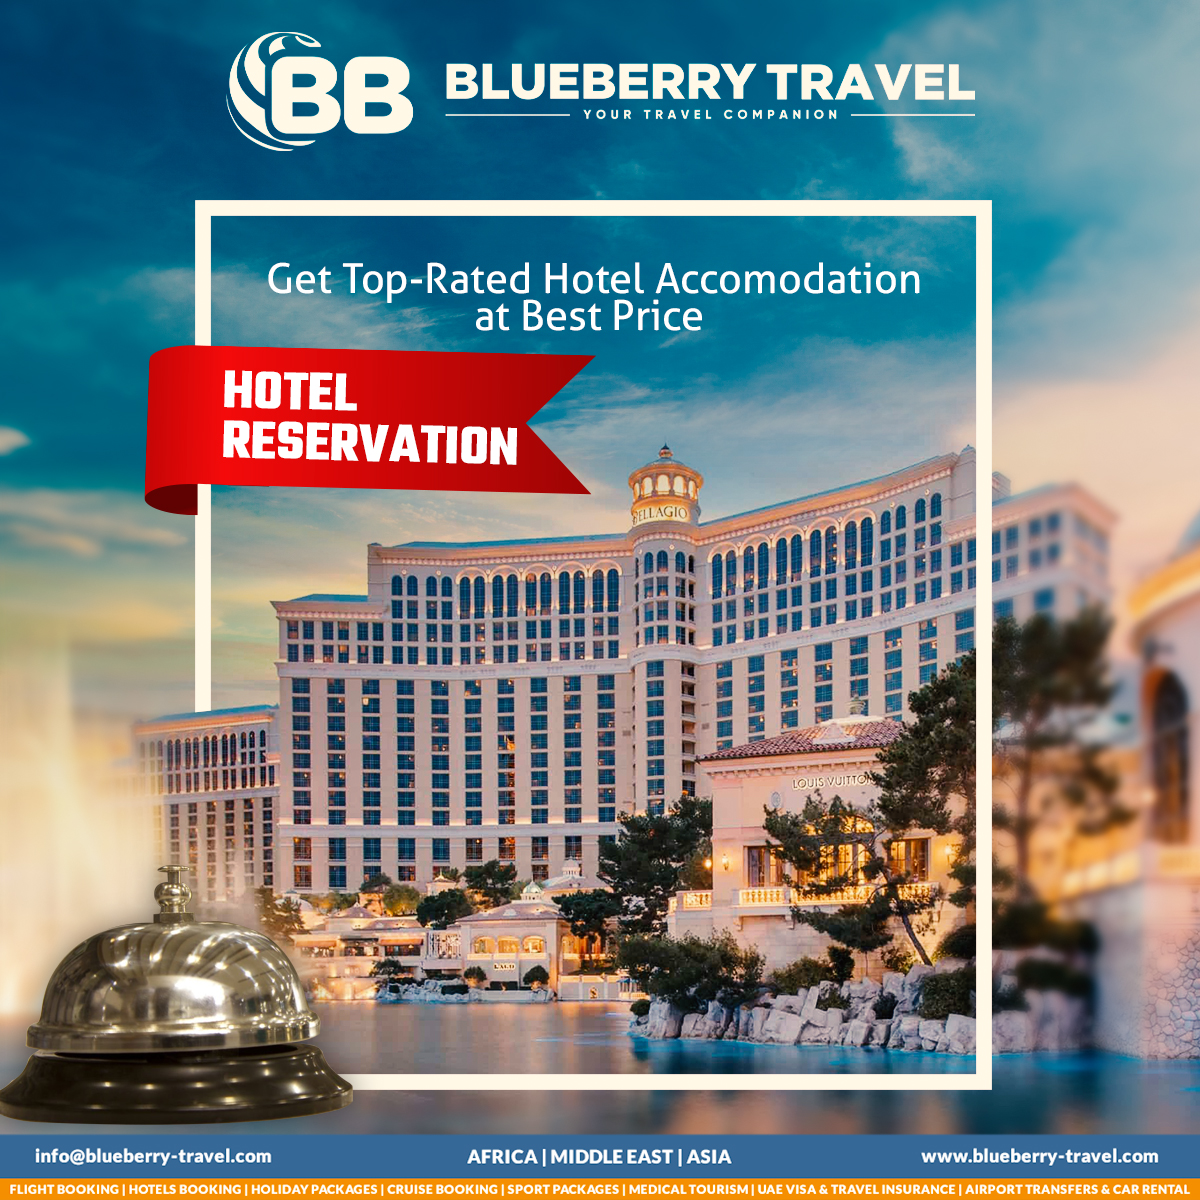 Unlock the best rates for your hotel bookings with us! Experience top-notch stays without breaking the bank

#PaperLeak #KokilabenAmbani #YamiGautam #bluberrytravel #hotelreservation